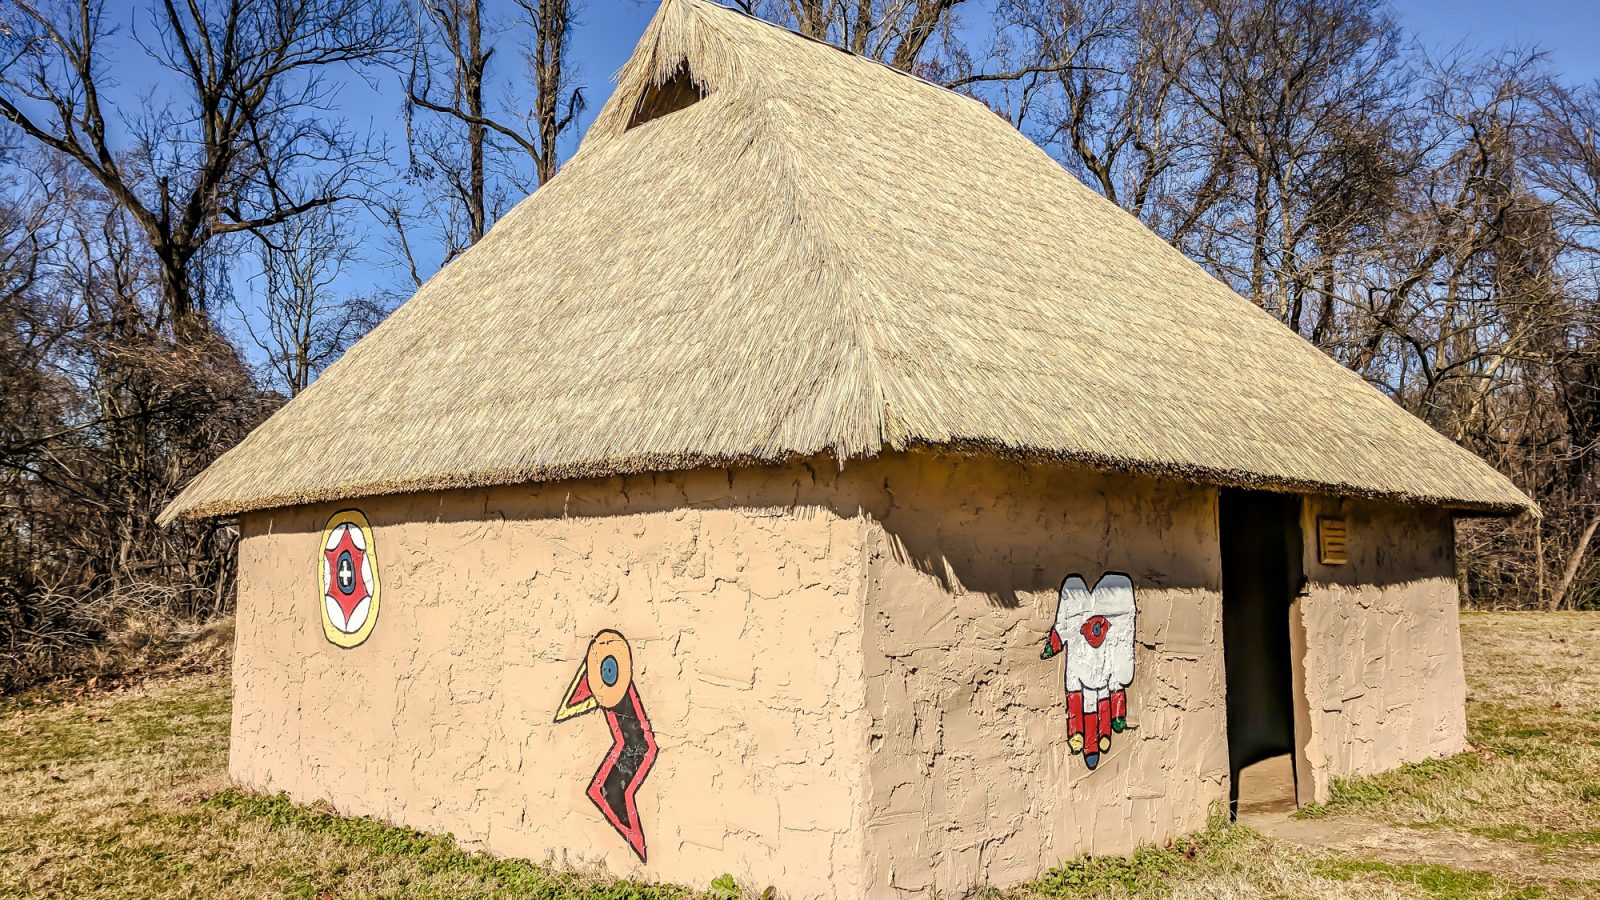 9 Reasons You Should Visit Chucalissa Indian Village | Memphis, Tennessee | West Tennessee Historic Landmark | History museum | Native American, American Indian historical site | Chickasaw, Choctaw, Cherokee, Quapaw, Mississippian culture | Earthen Mound complex